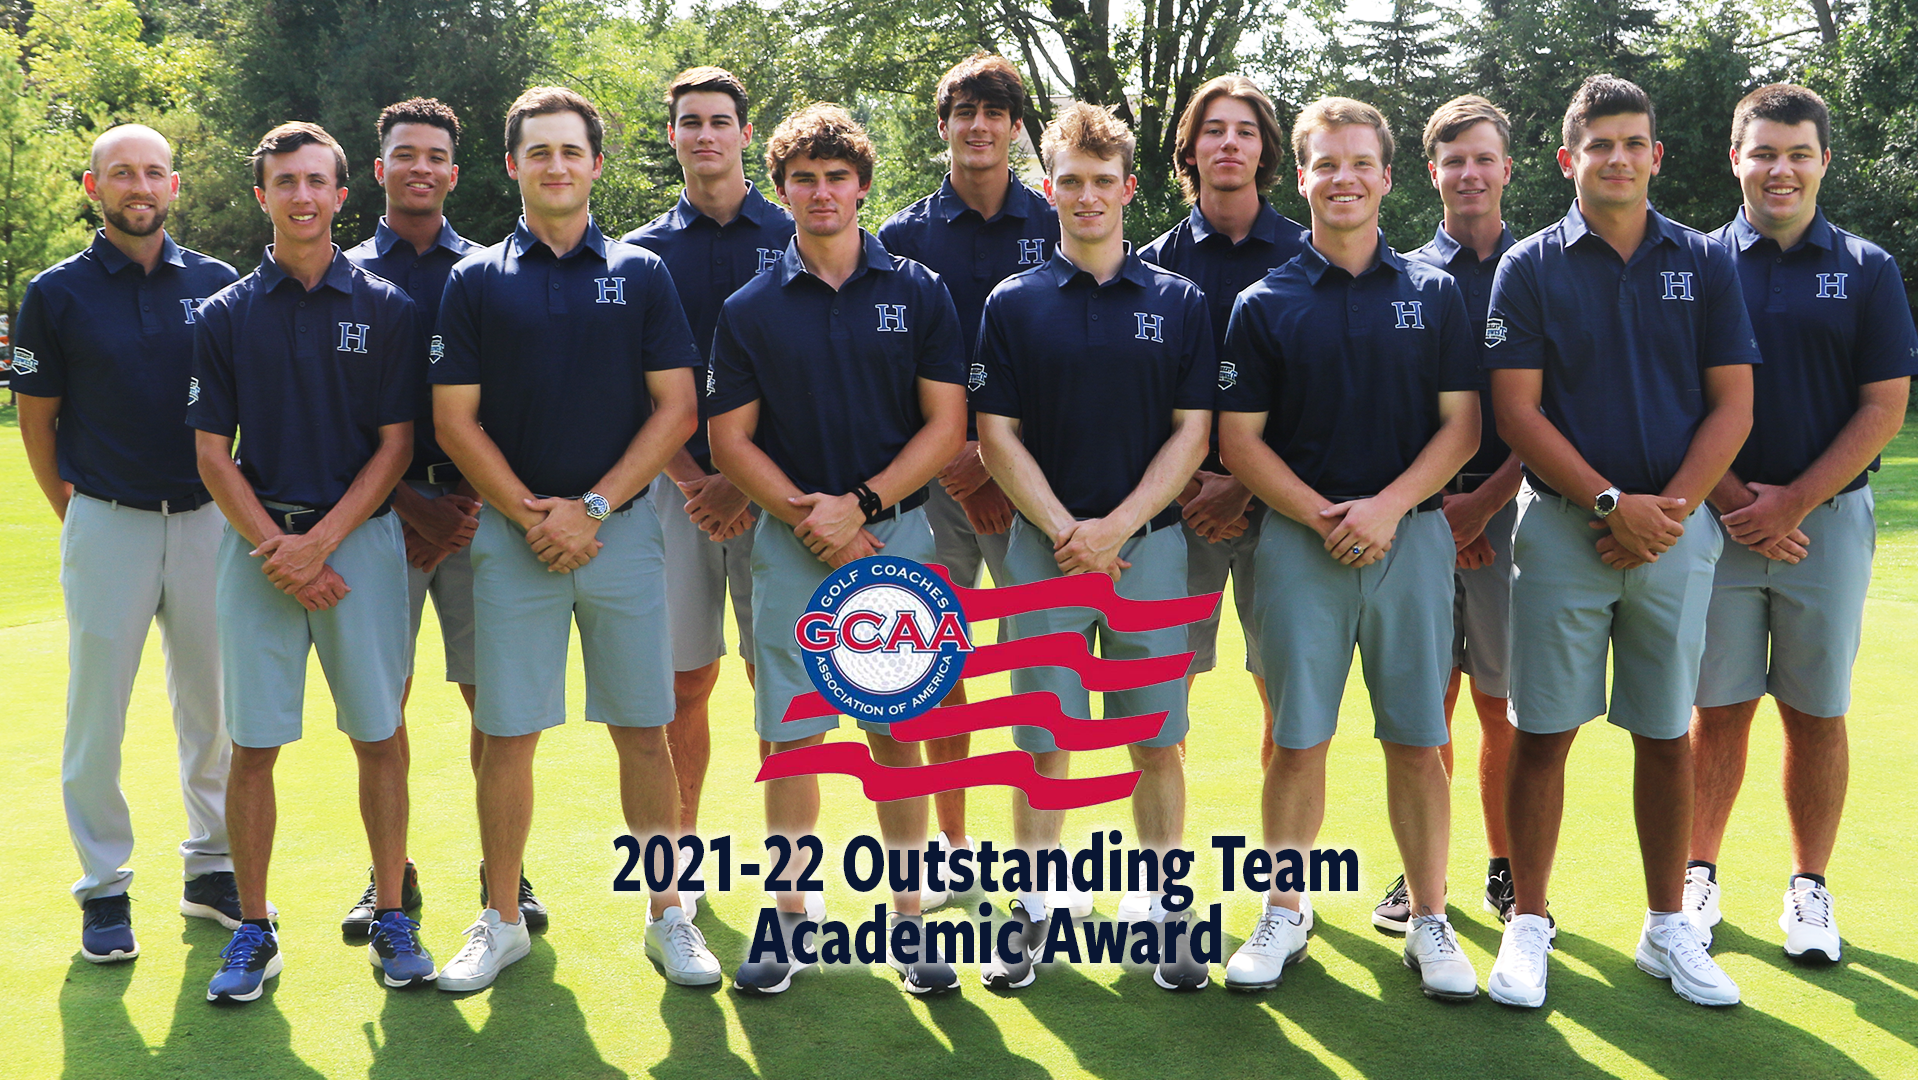 Charger men's golf team receives 2021-22 GCAA Outstanding Team Academic honors